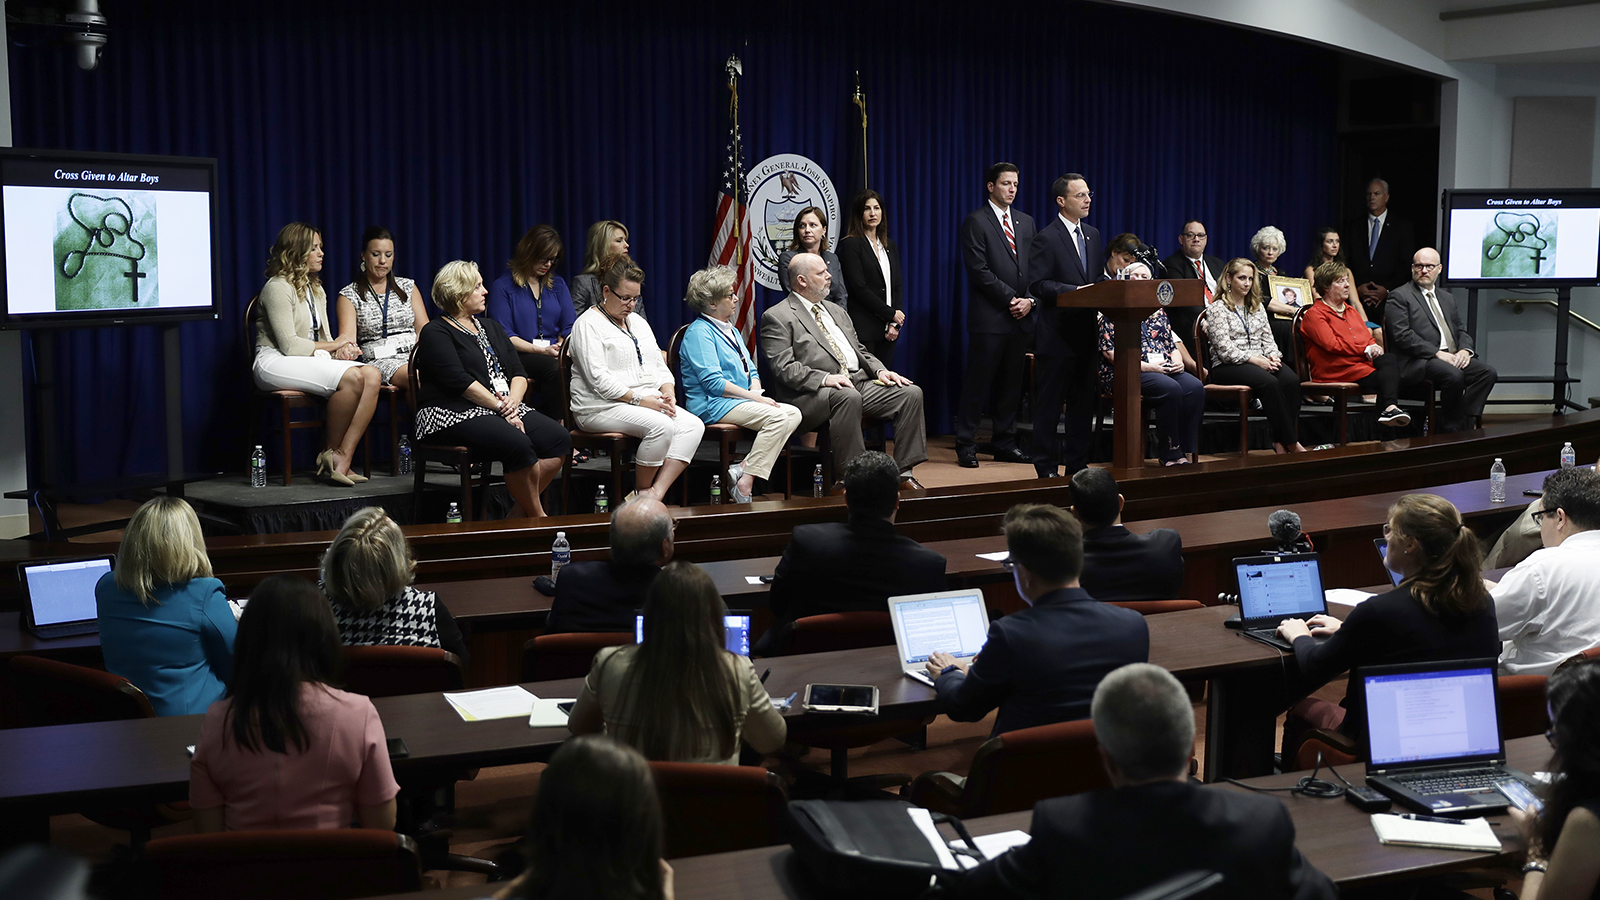 Pennsylvania Attorney General Josh Shapiro speaks during a news conference at the State Capitol in Harrisburg, Pennsylvania August 14, 2018. A Pennsylvania grand jury said its investigation into clergy sex abuse had identified more than 1,000 child victims.  The grand jury report says that number comes from the records of six Roman Catholic dioceses.  Those seated were among those affected by clergy abuse.  (AP Photo/Matt Rourke)